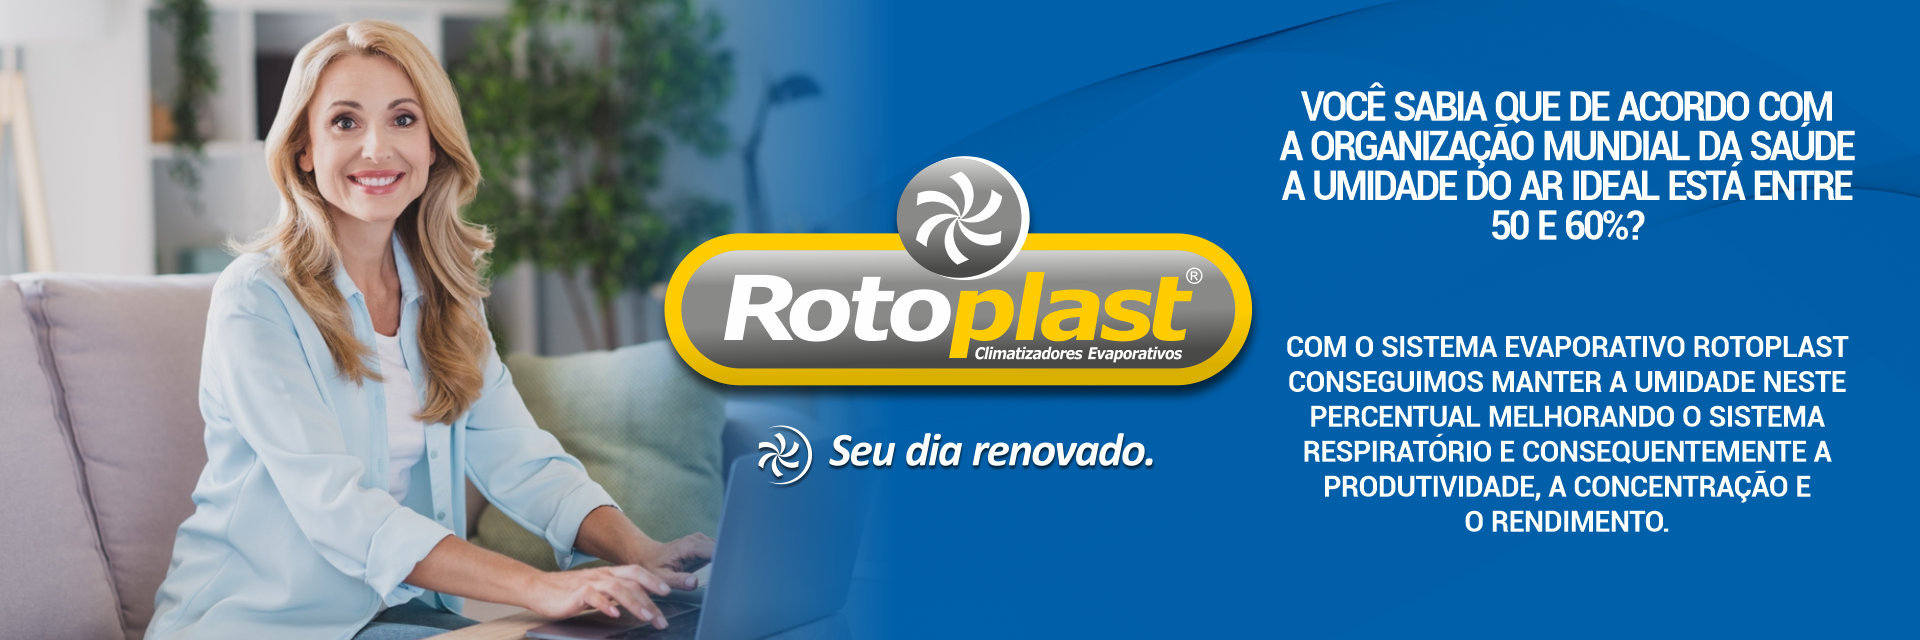 ROTOPLAST_BANNER-DIFERENCIAIS-1920x640